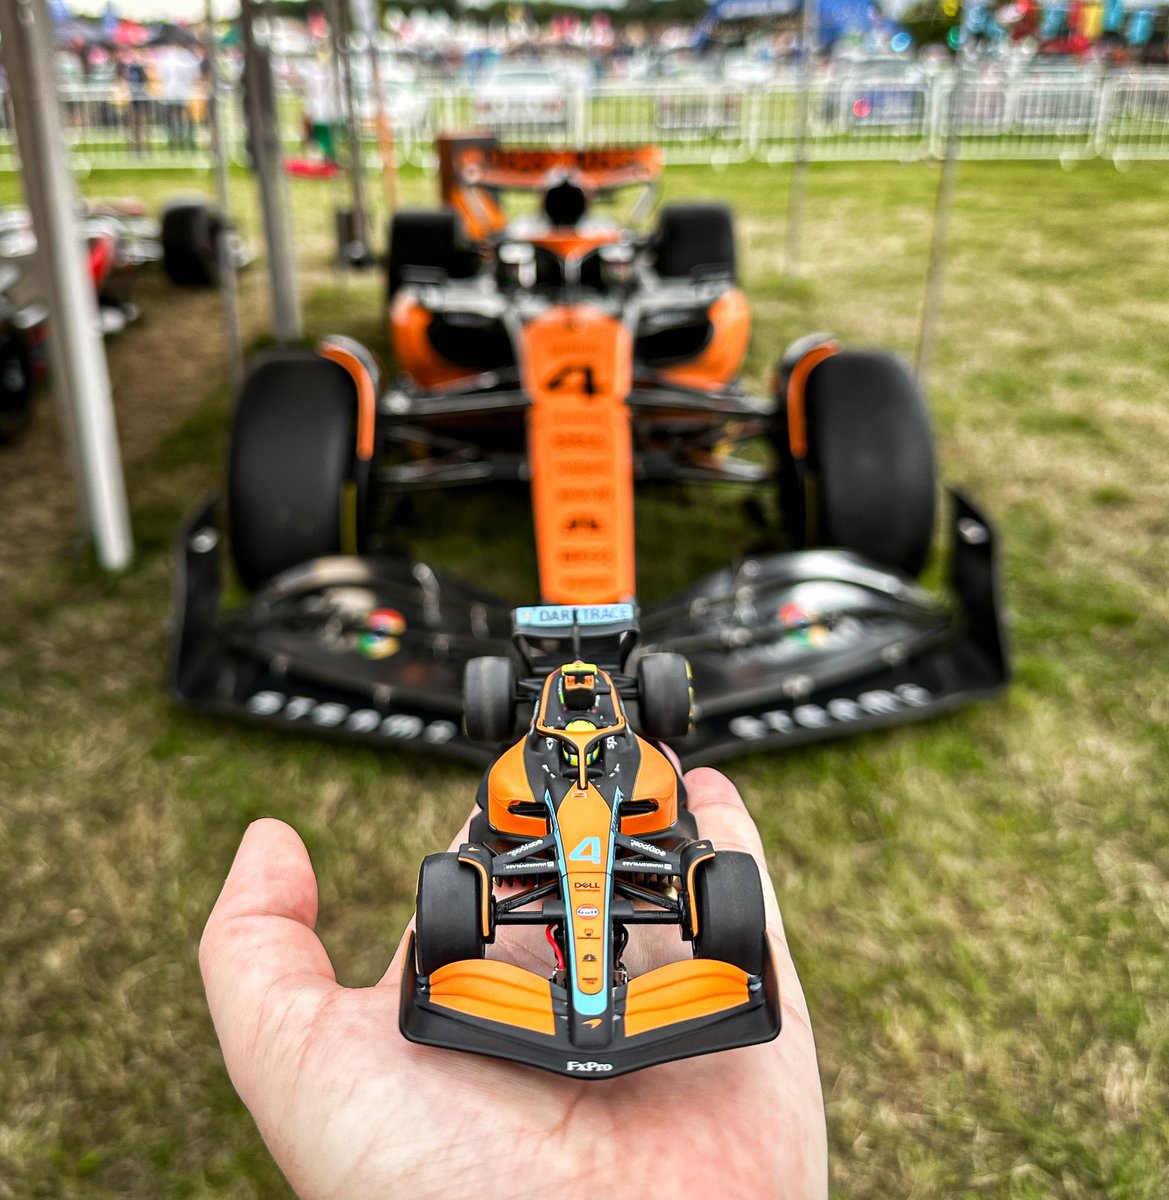 Throwback to last year's CarFest event where our 1:32 scale McLaren MCL36 met it's big older brother 🟠 #McLarenMonday Get yours here 👉 bit.ly/3XJi4AR